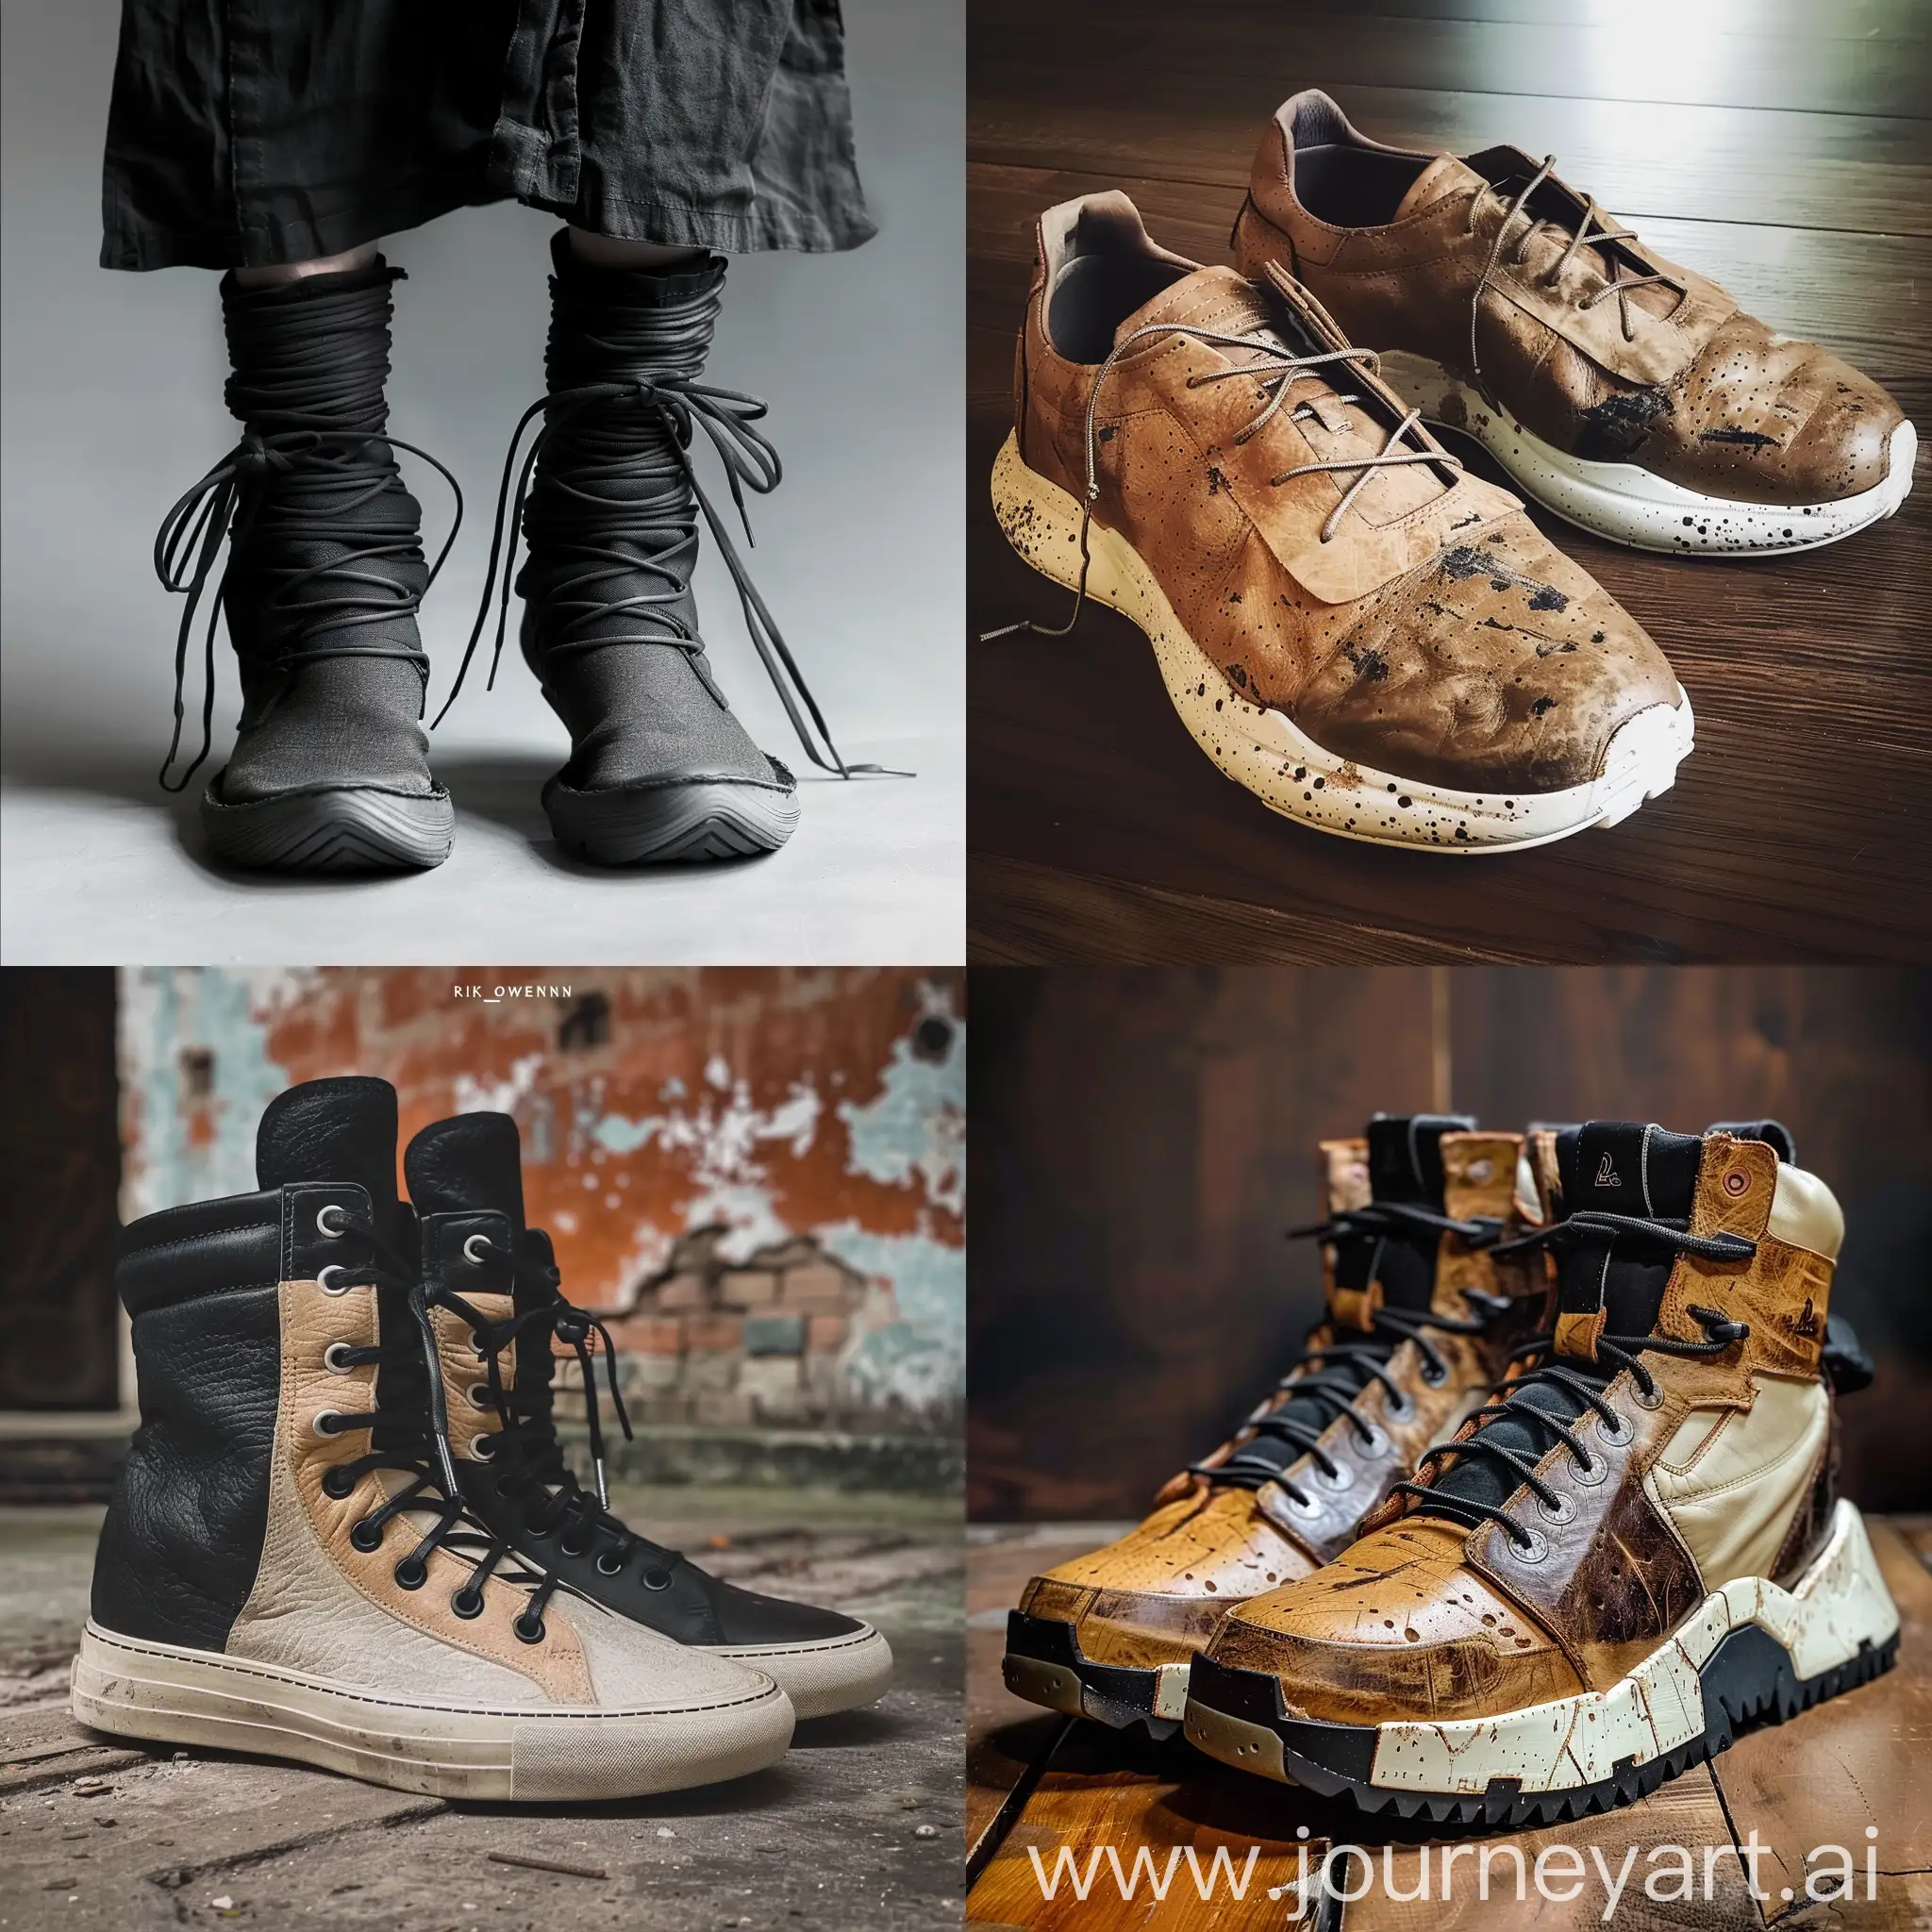 Fashionable-Rick-Owens-Shoes-Style